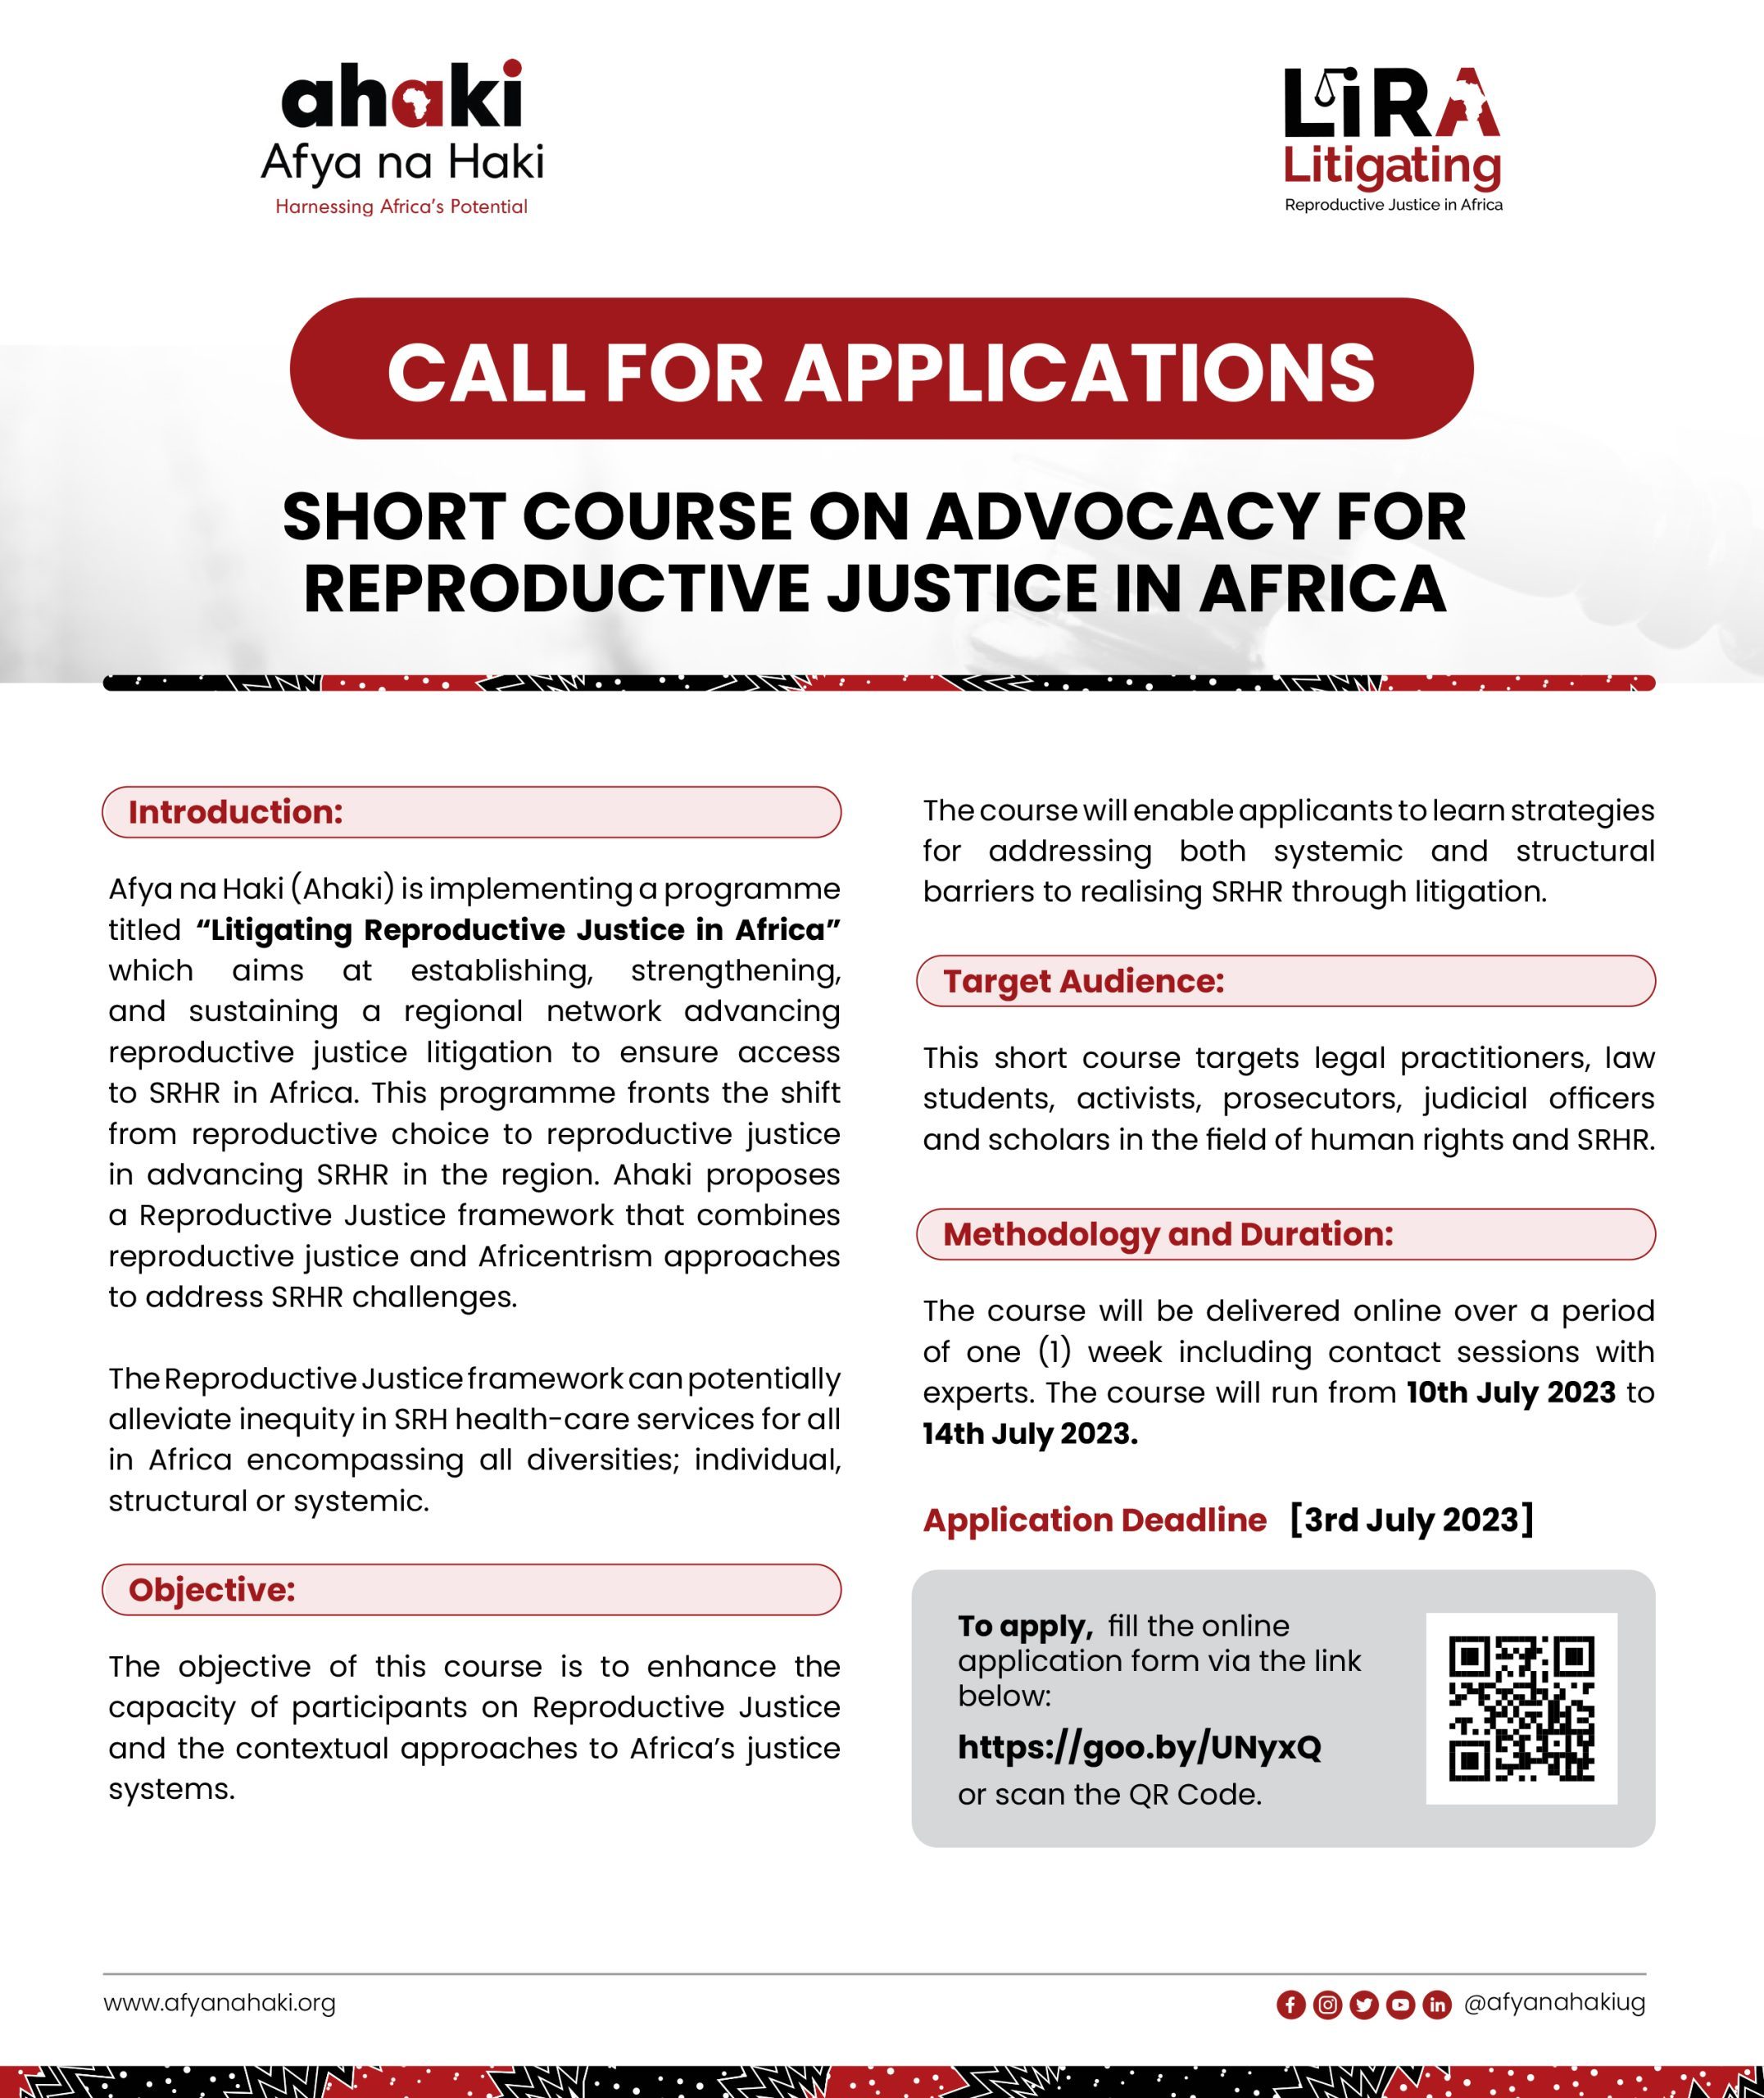 EDITED CALL FOR APPLICANTS SHORT COURSE ON REPRODUCTIVE JUSTICE IN AFRICA jPG